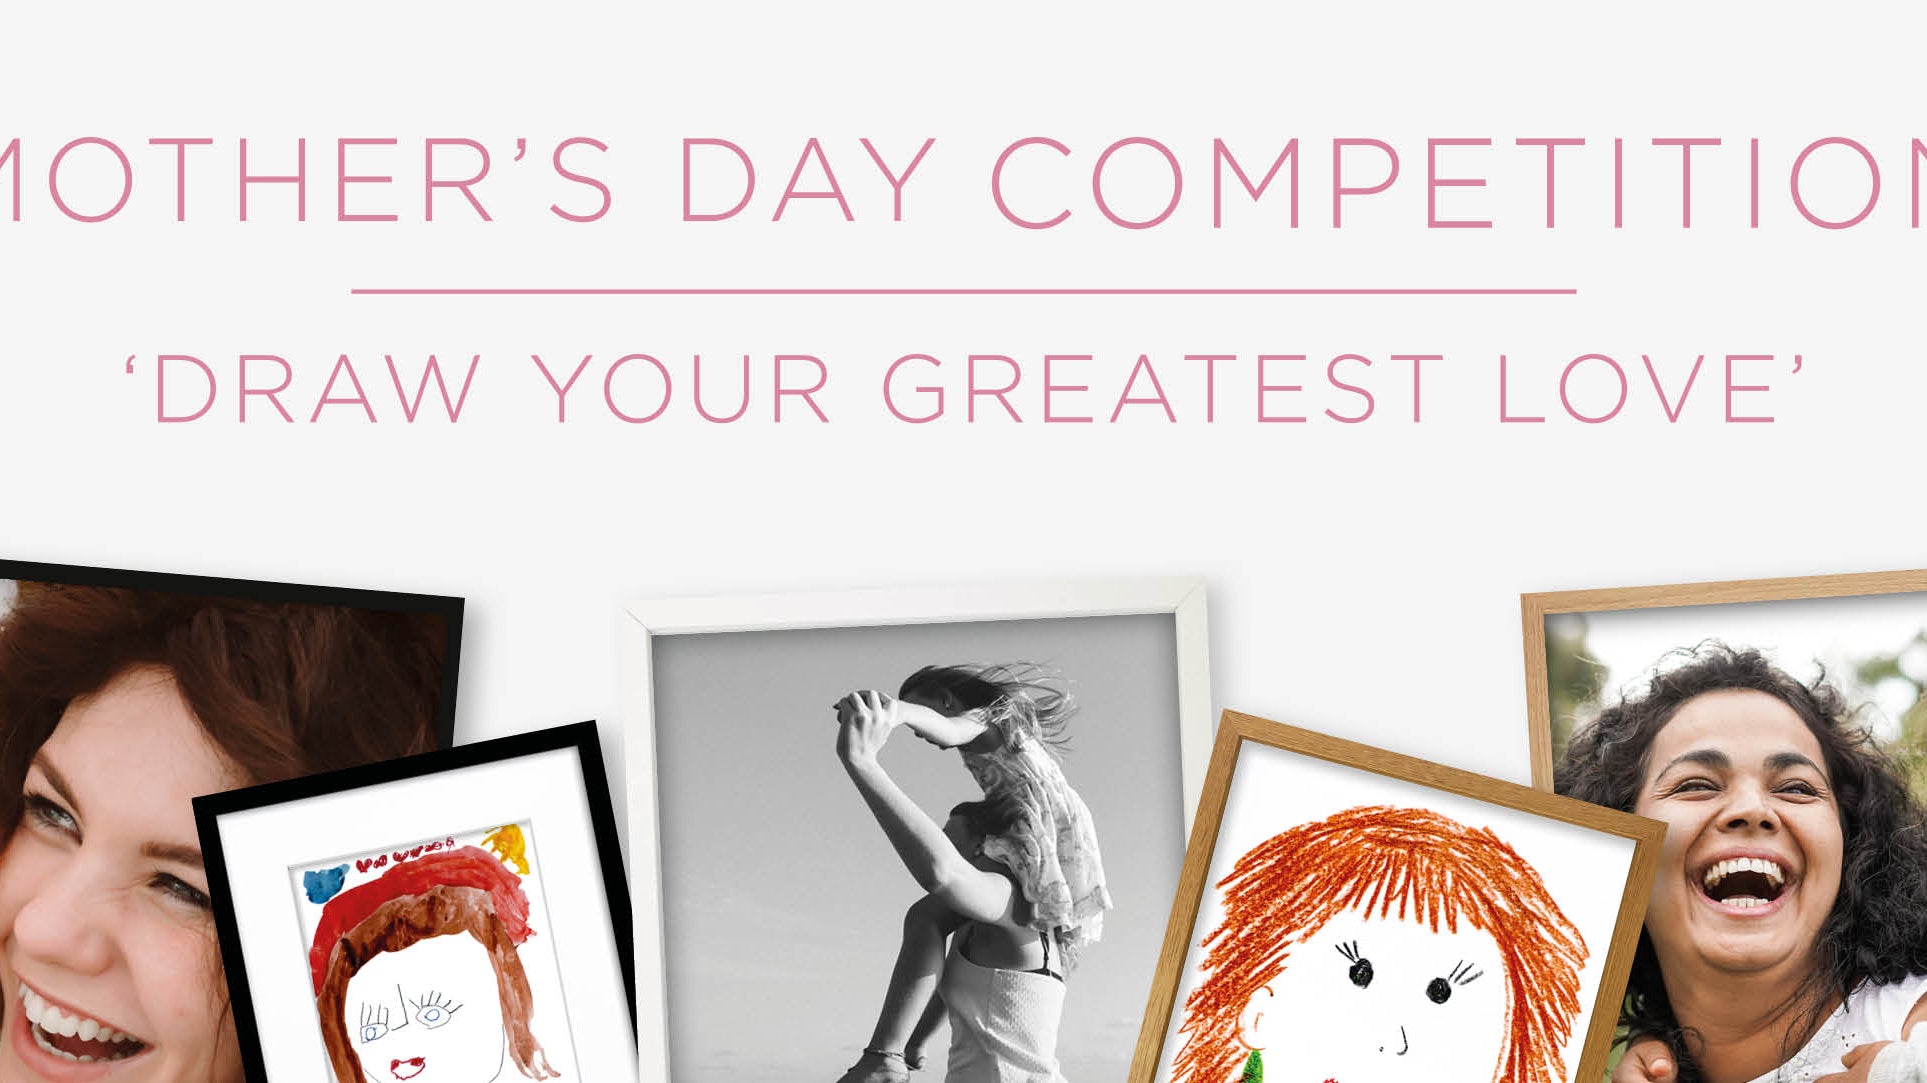 Congratulations to Ronnie, Our Mother’s Day Competition Winner!